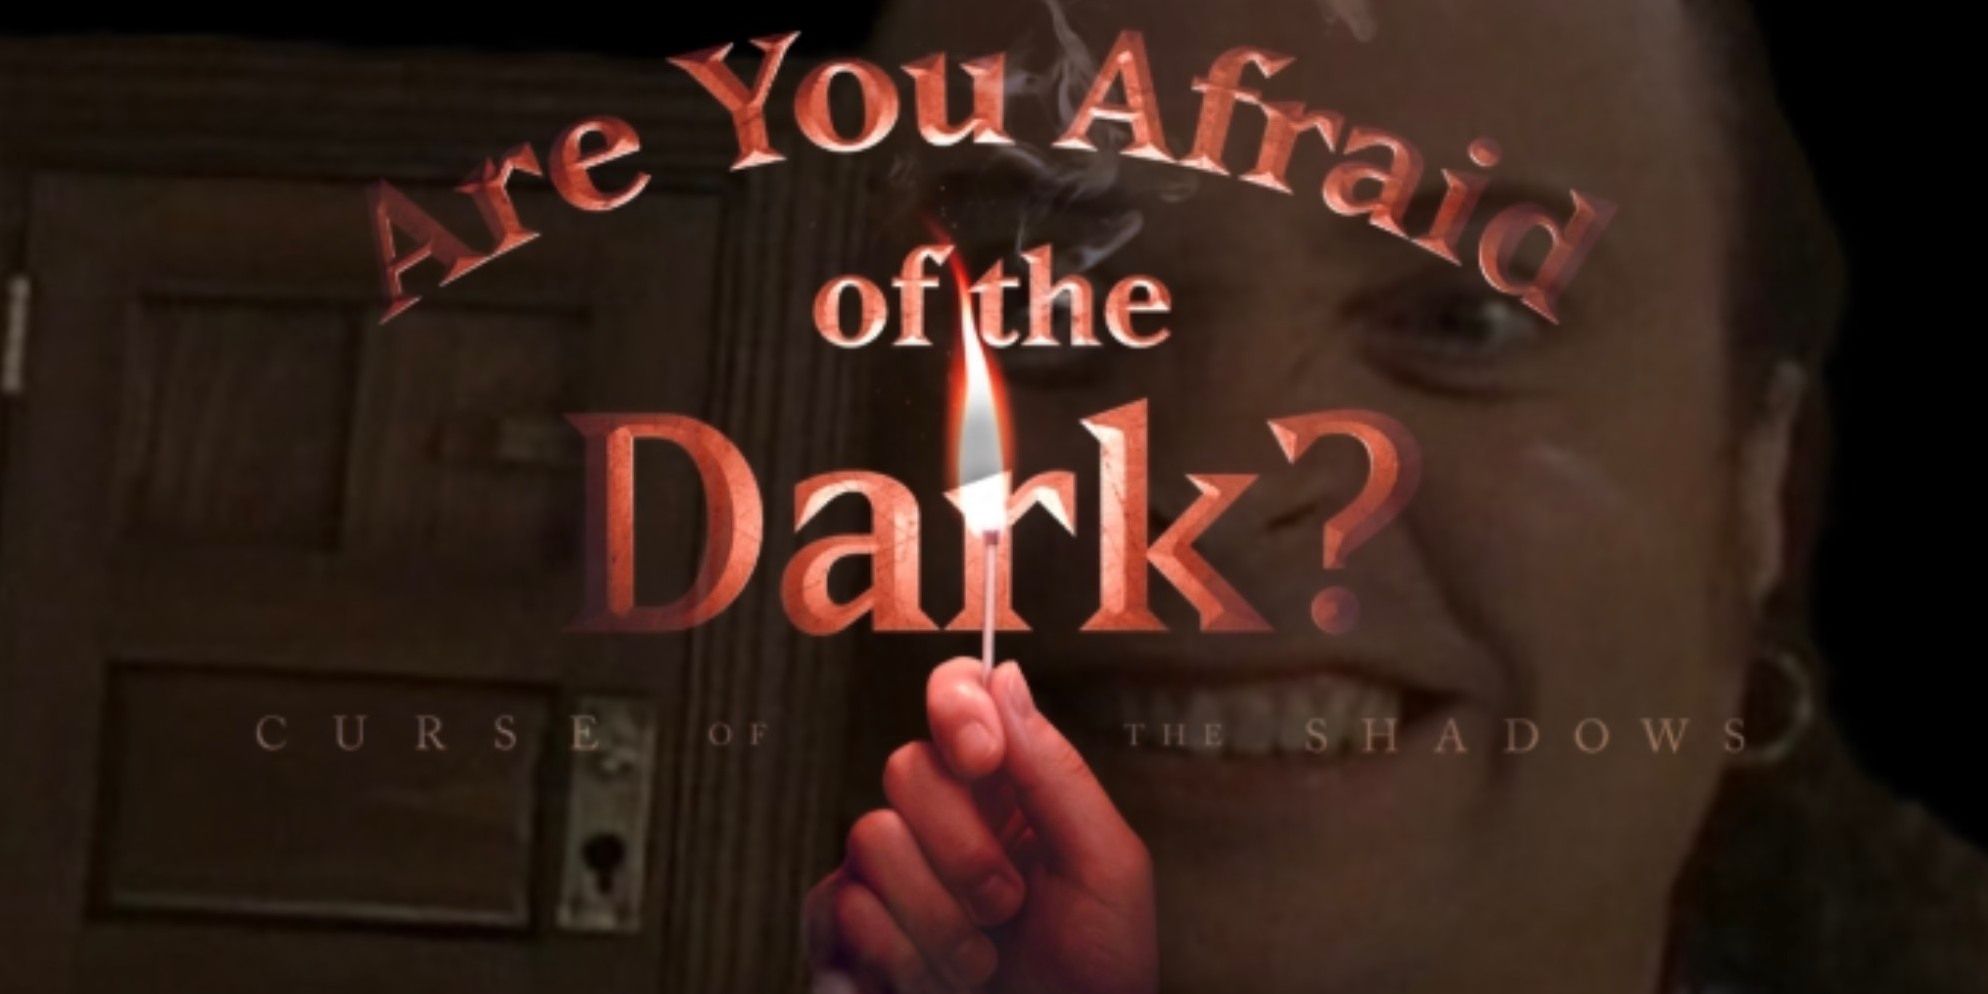 Are You Afraid Of The Dark Curse Of The Shadows